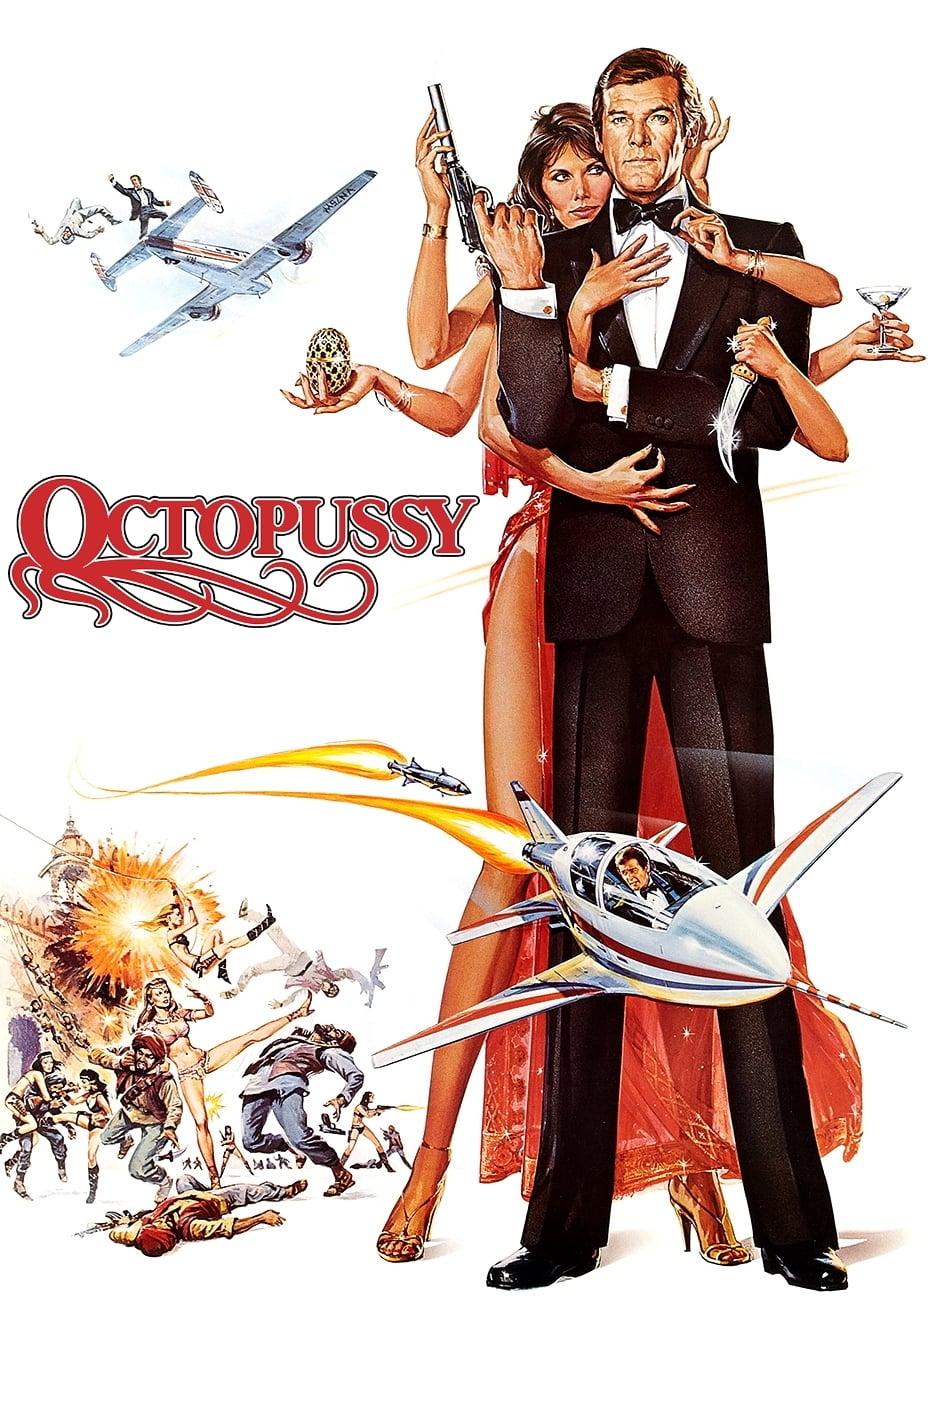 007 Contra Octopussy (1983)